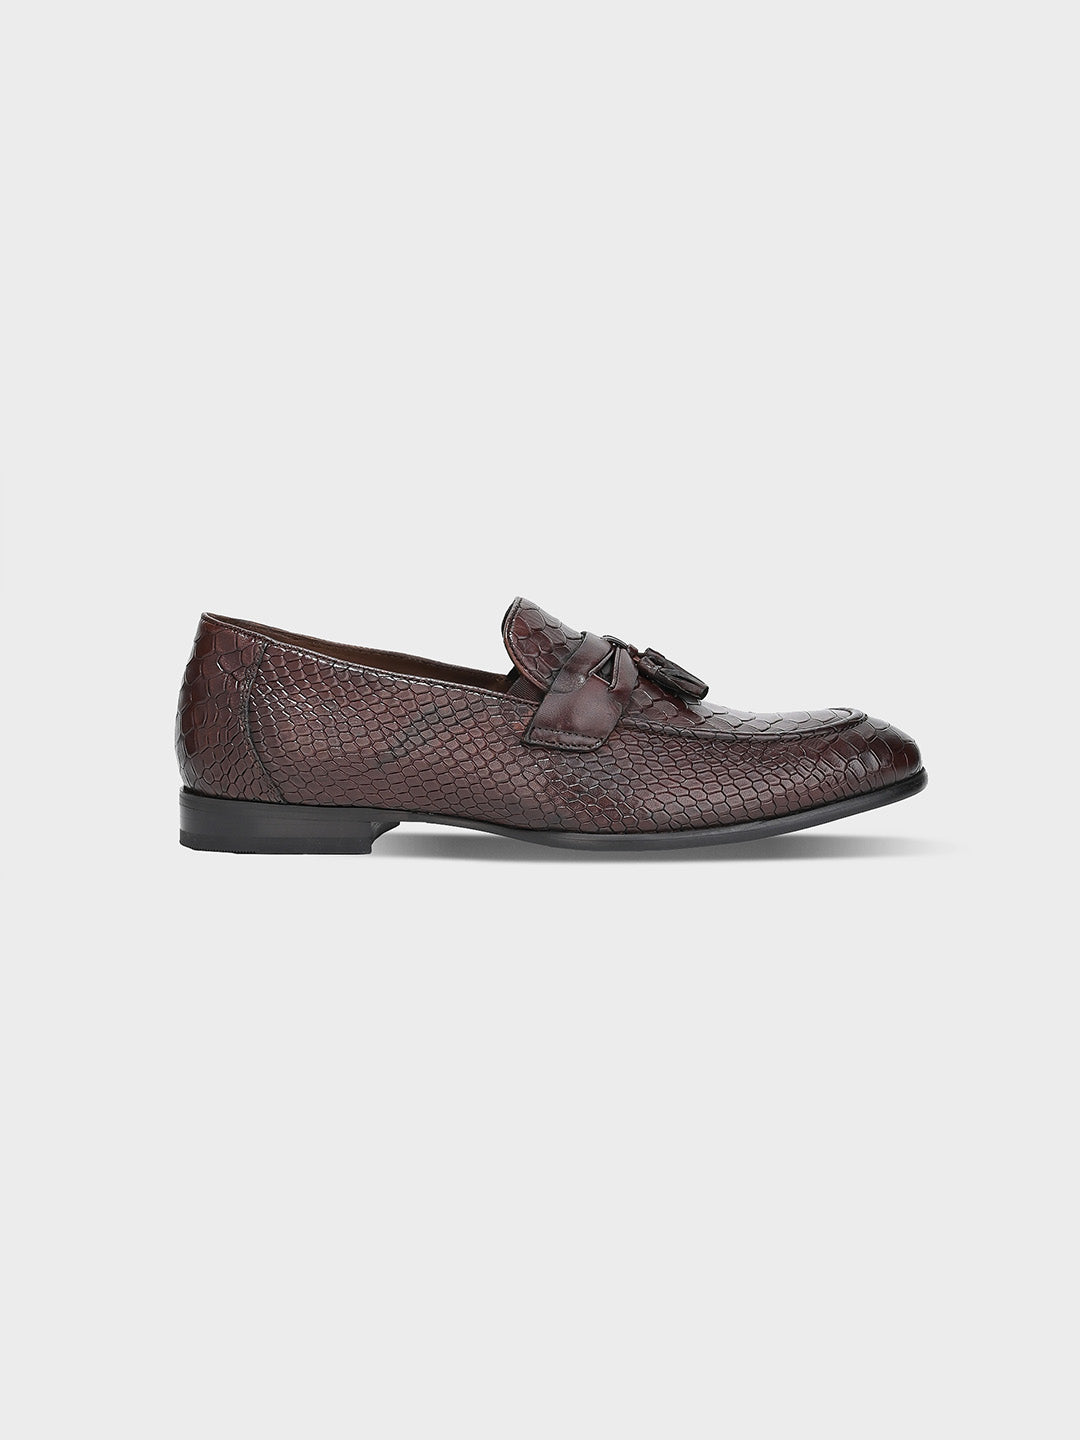 Classic Brown Leather Men's Tassel Slip-On Shoes